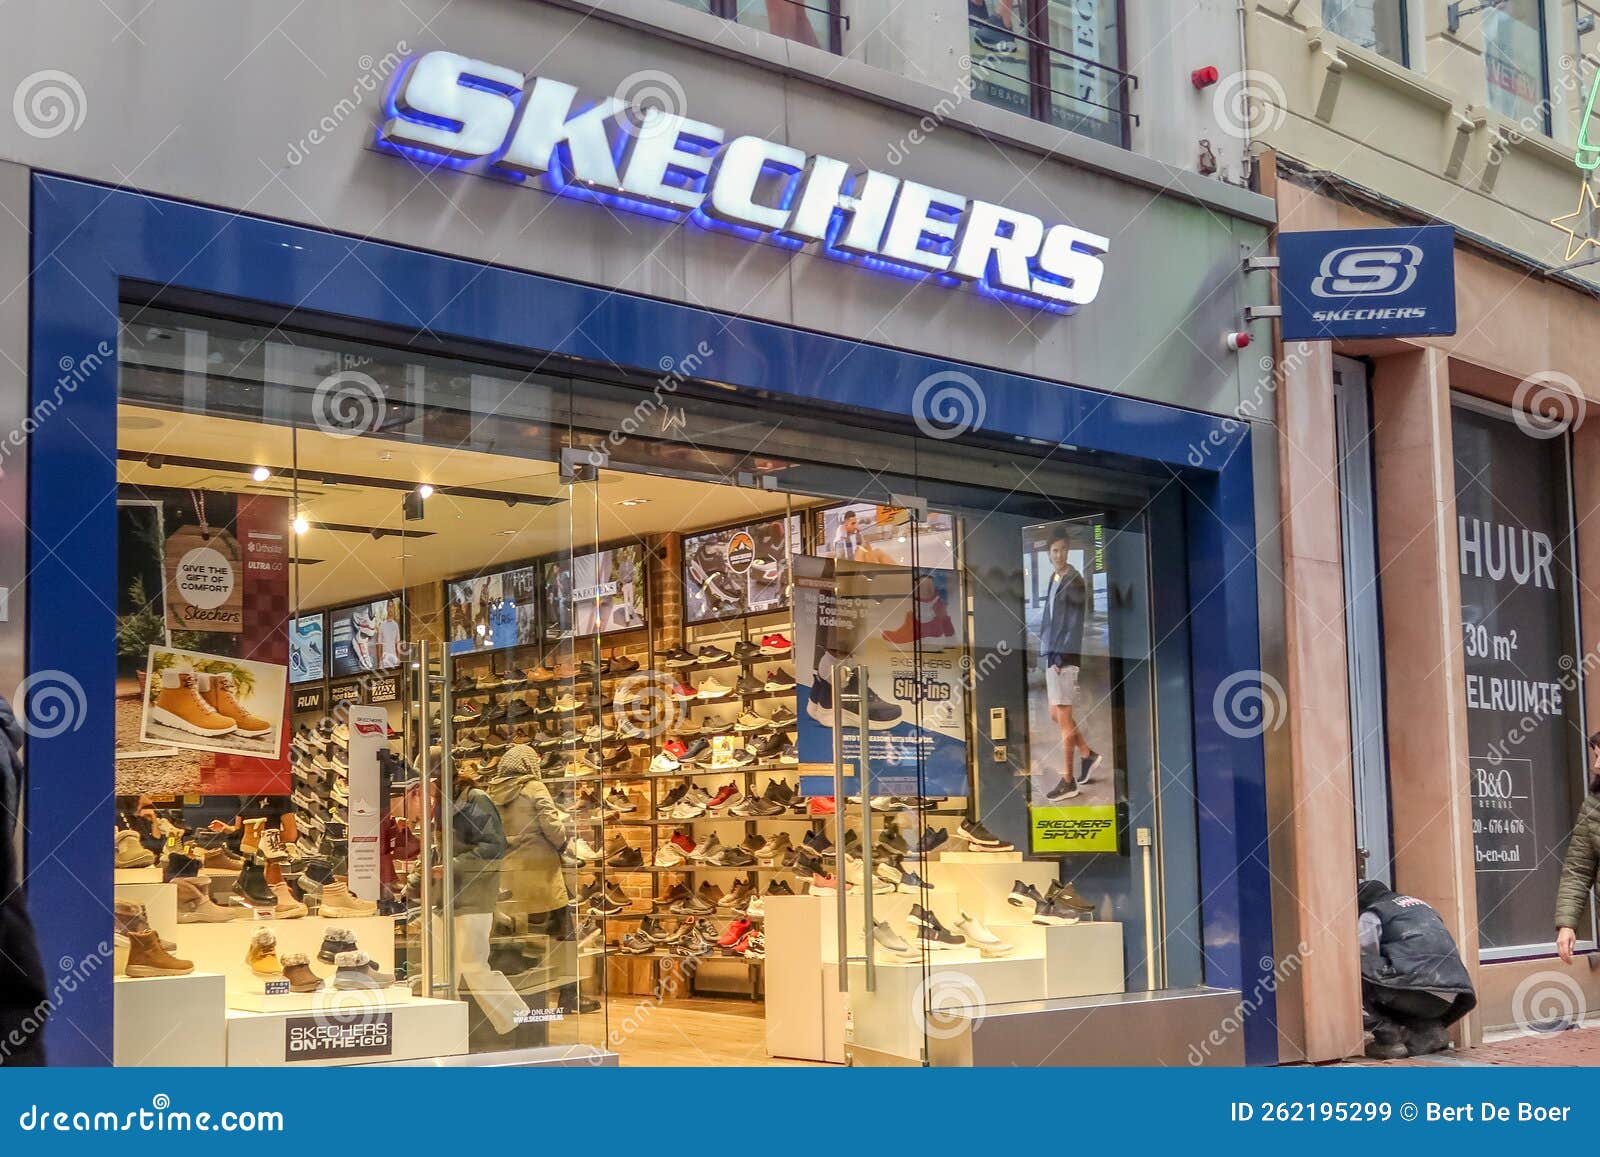 160 Sketchers - Free & Royalty-Free Stock Photos from Dreamstime